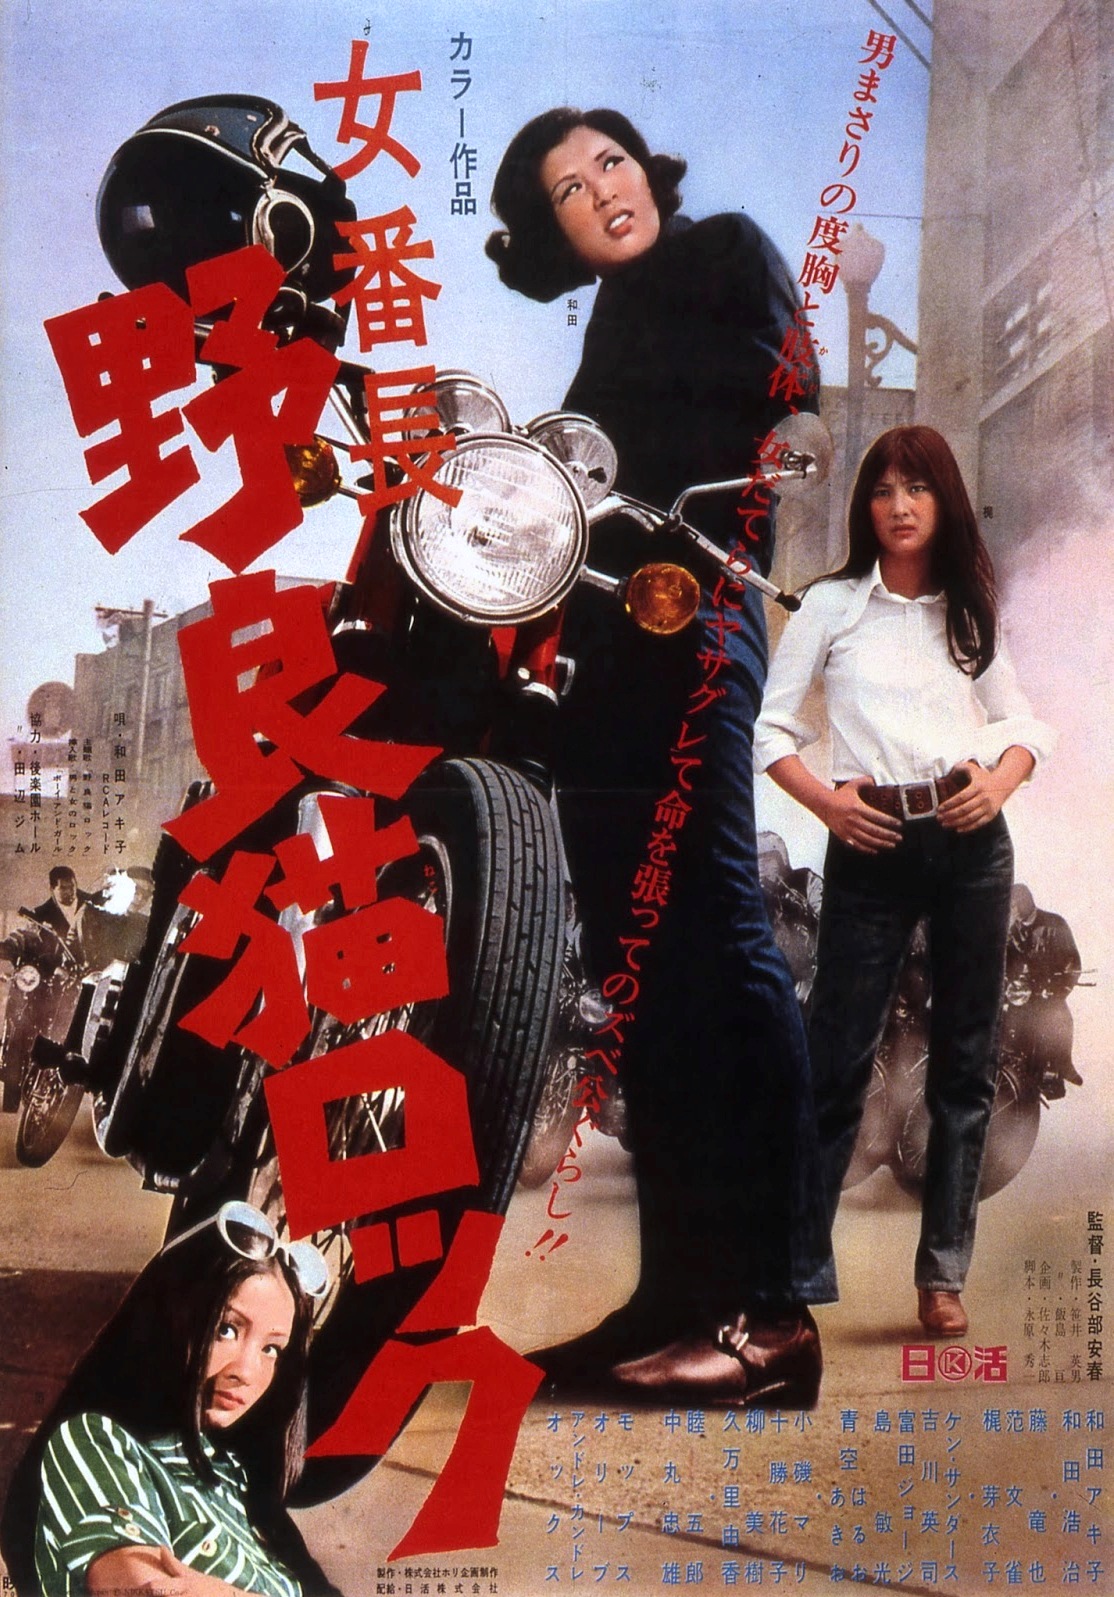 Stray Cat Rock: Delinquent Girl Boss (1970) with English Subtitles on DVD on DVD